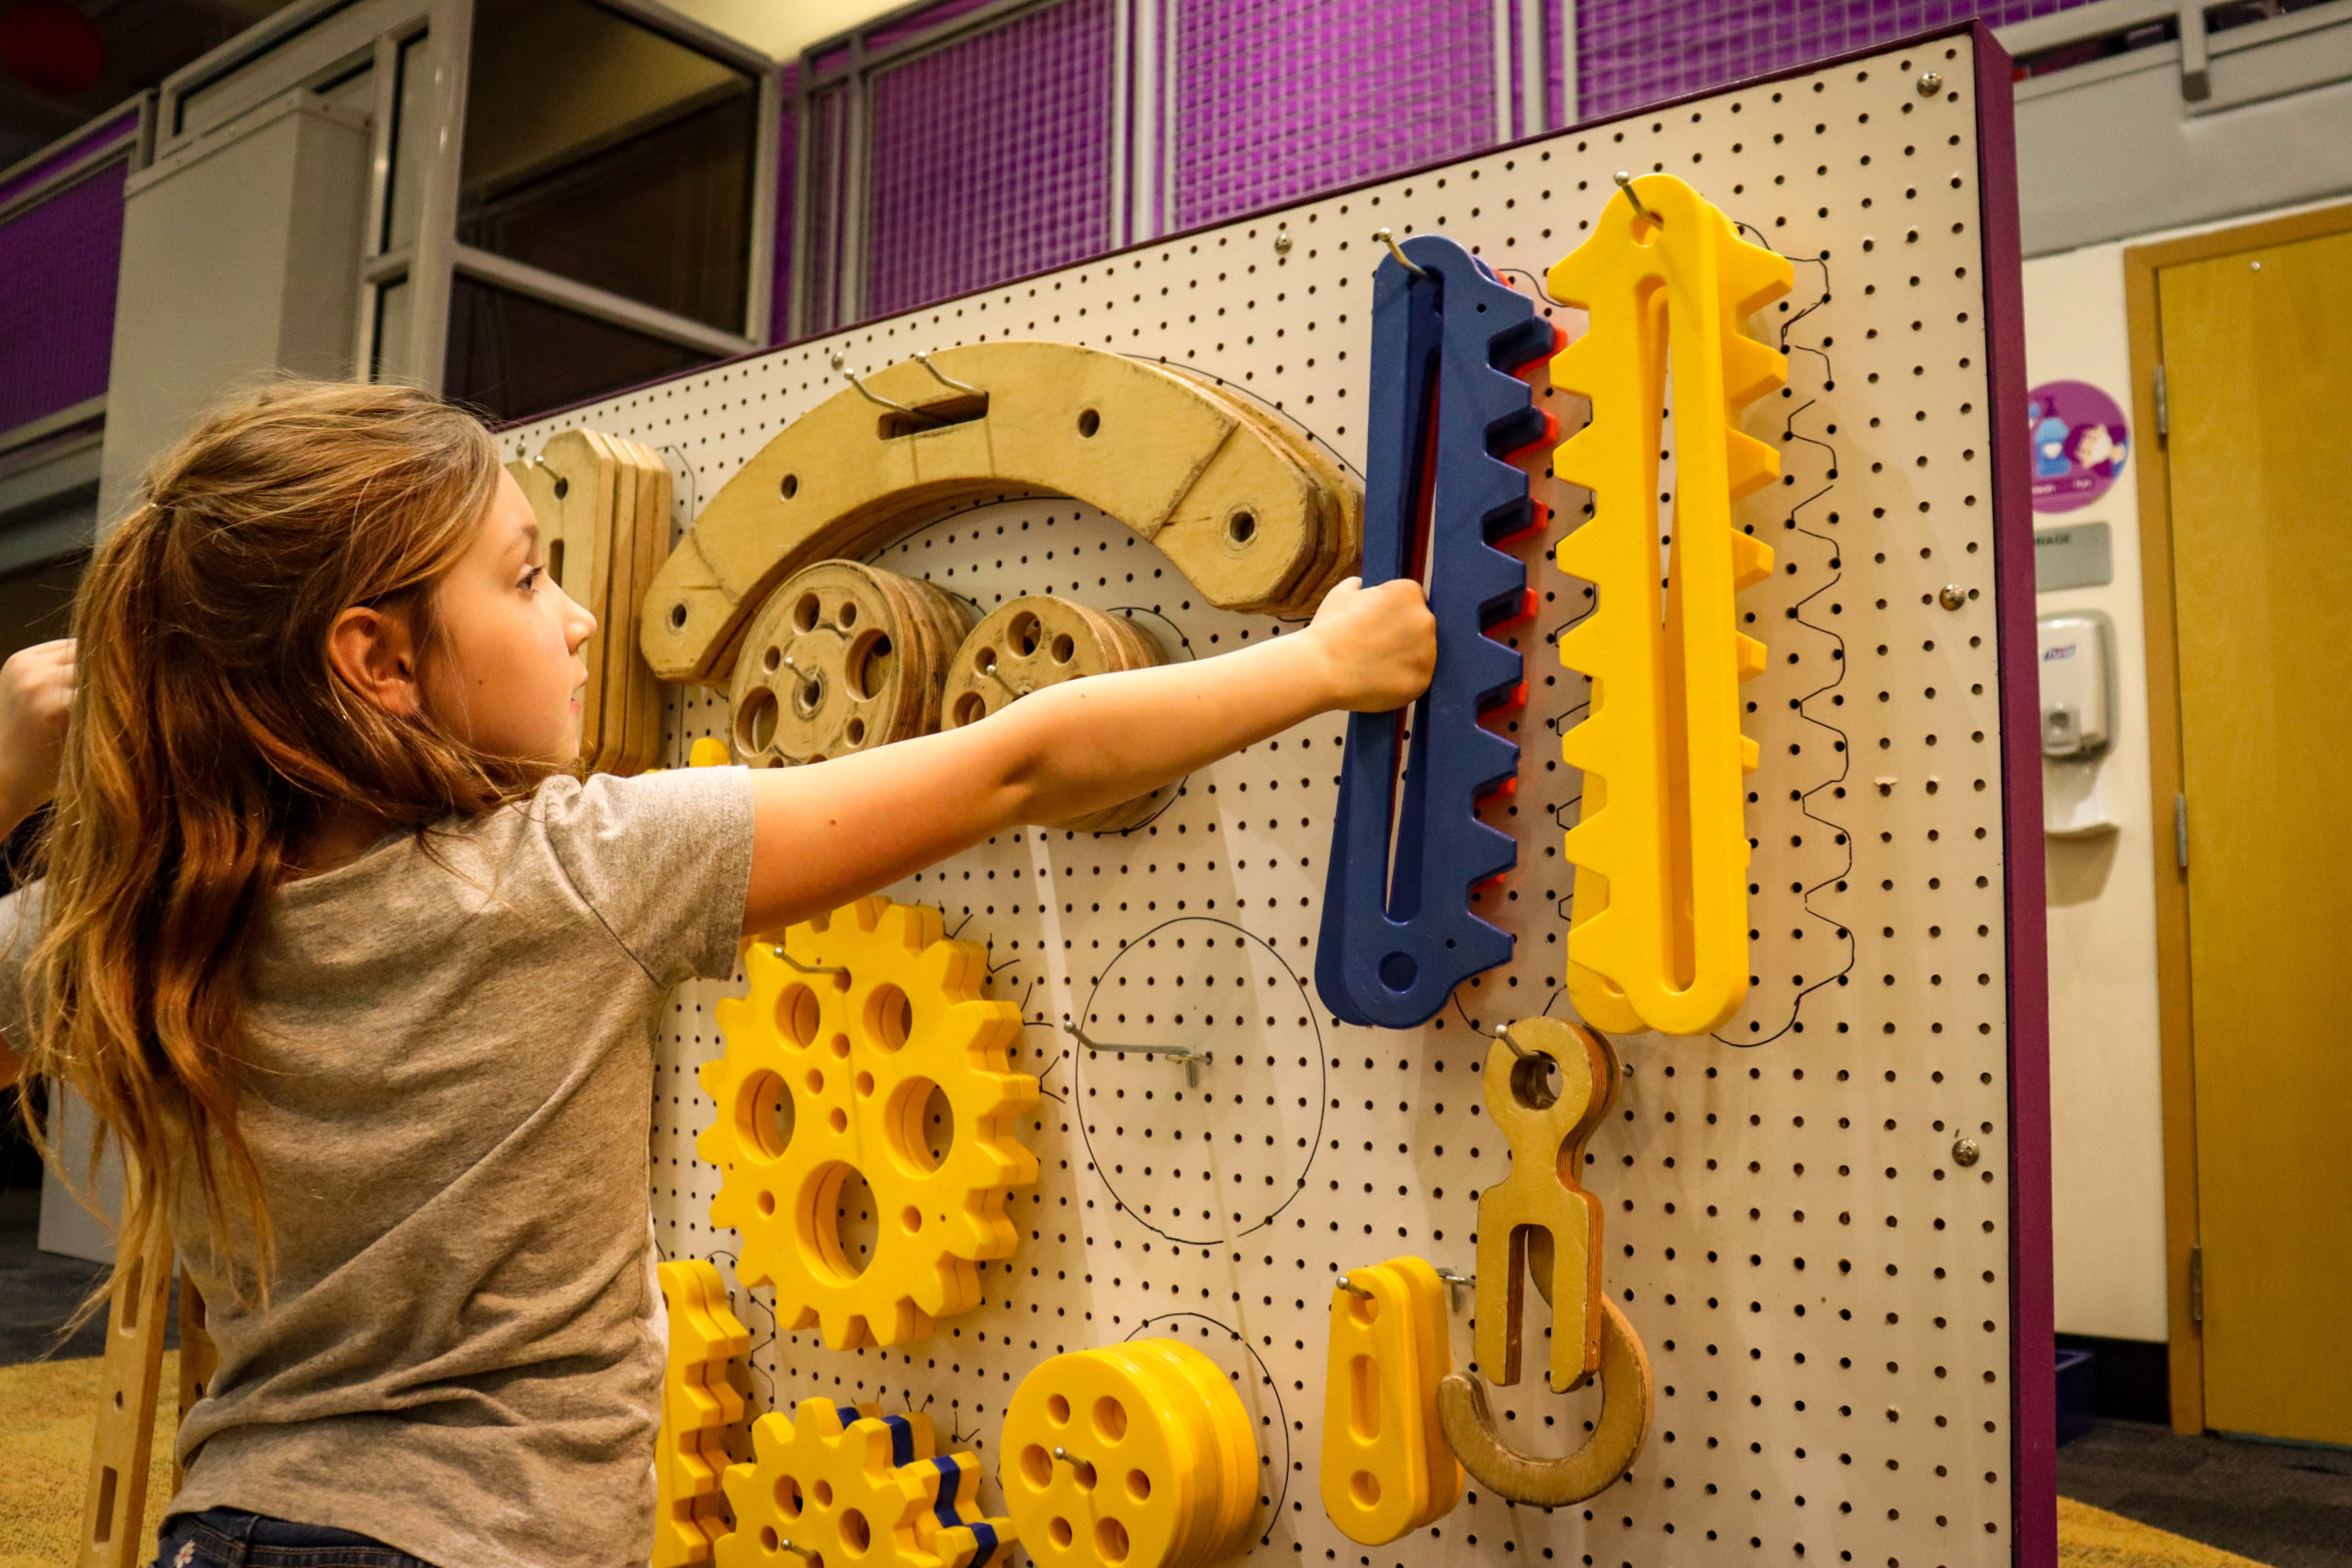 A young girl reaches for tools at an engineer exhibit at Glazer Children's Museum.